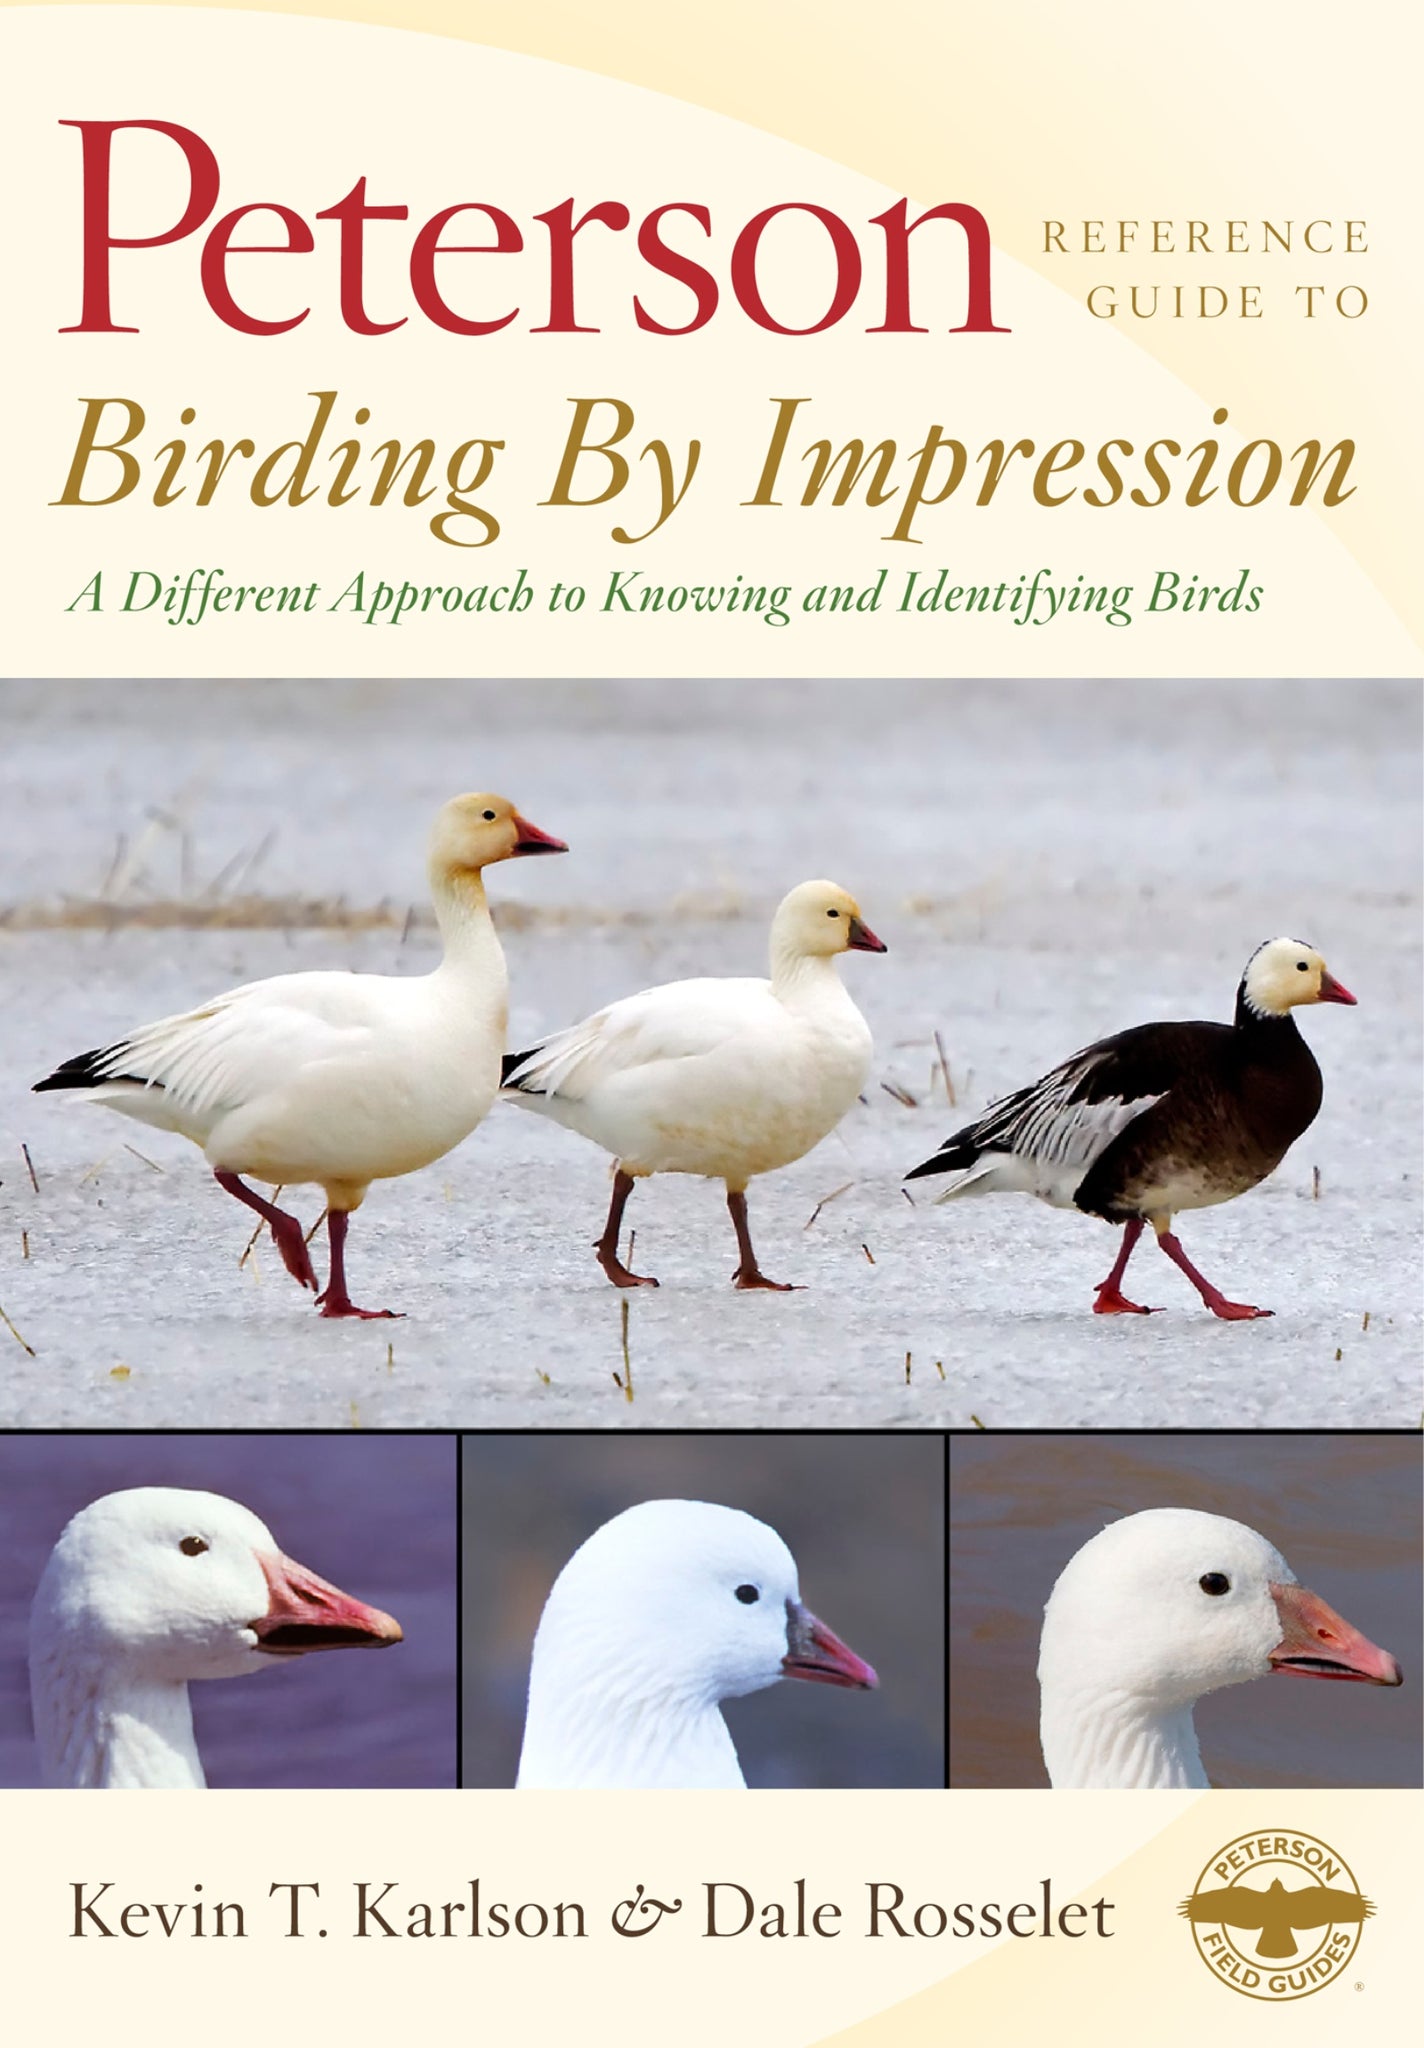 Peterson Reference Guide To Birding By Impression : A Different Approach to Knowing and Identifying Birds